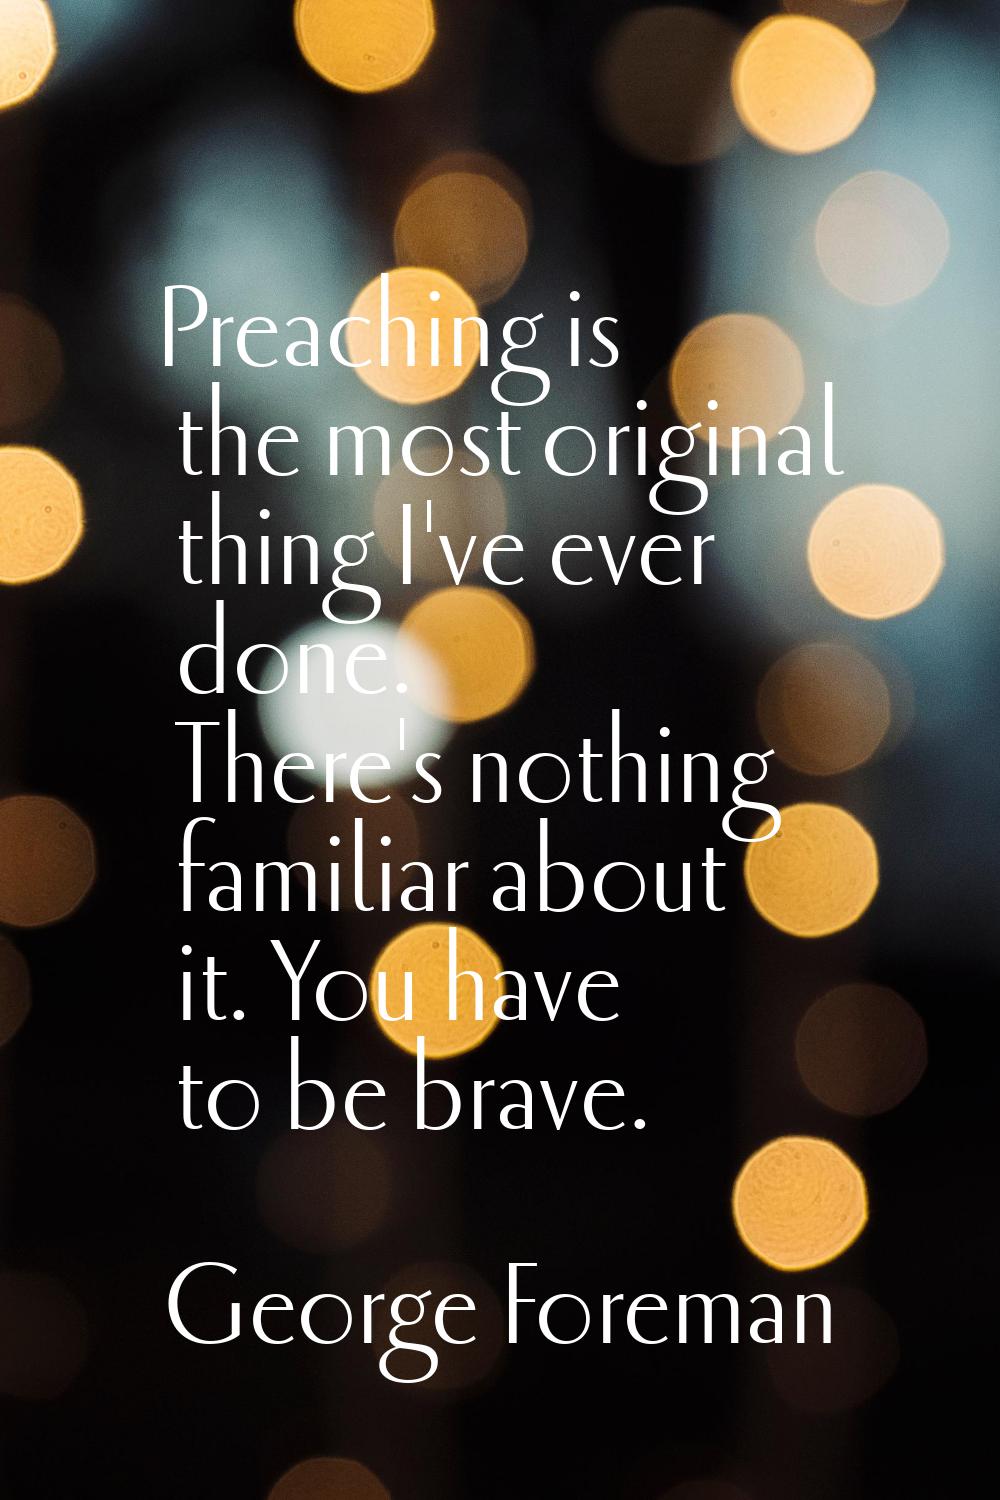 Preaching is the most original thing I've ever done. There's nothing familiar about it. You have to